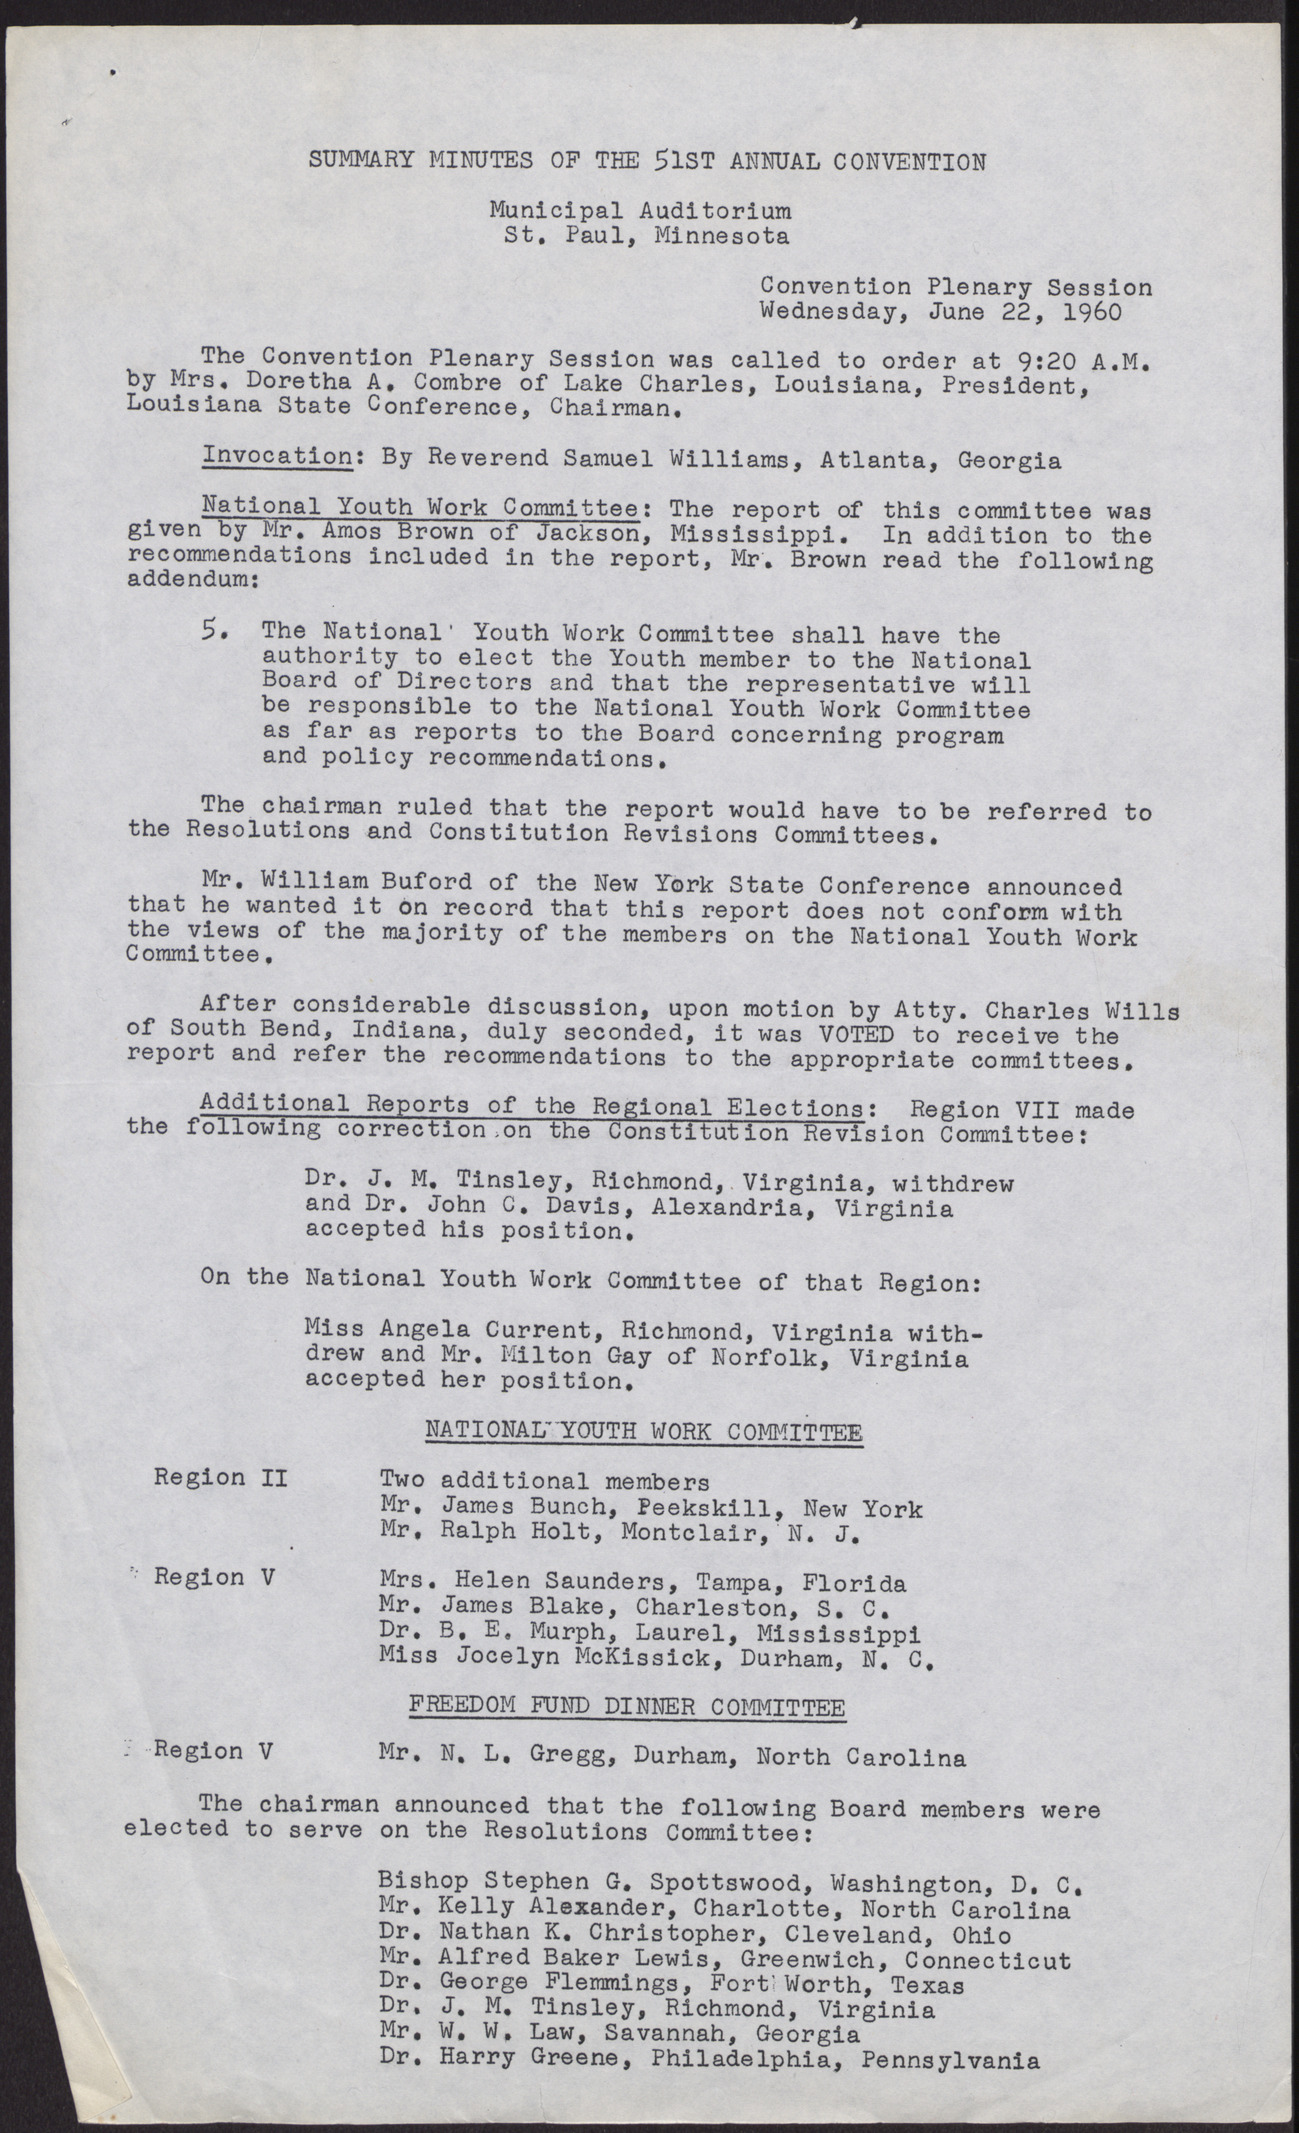 Minutes of the 51st Annual Convention (2 pages), June 22, 1960